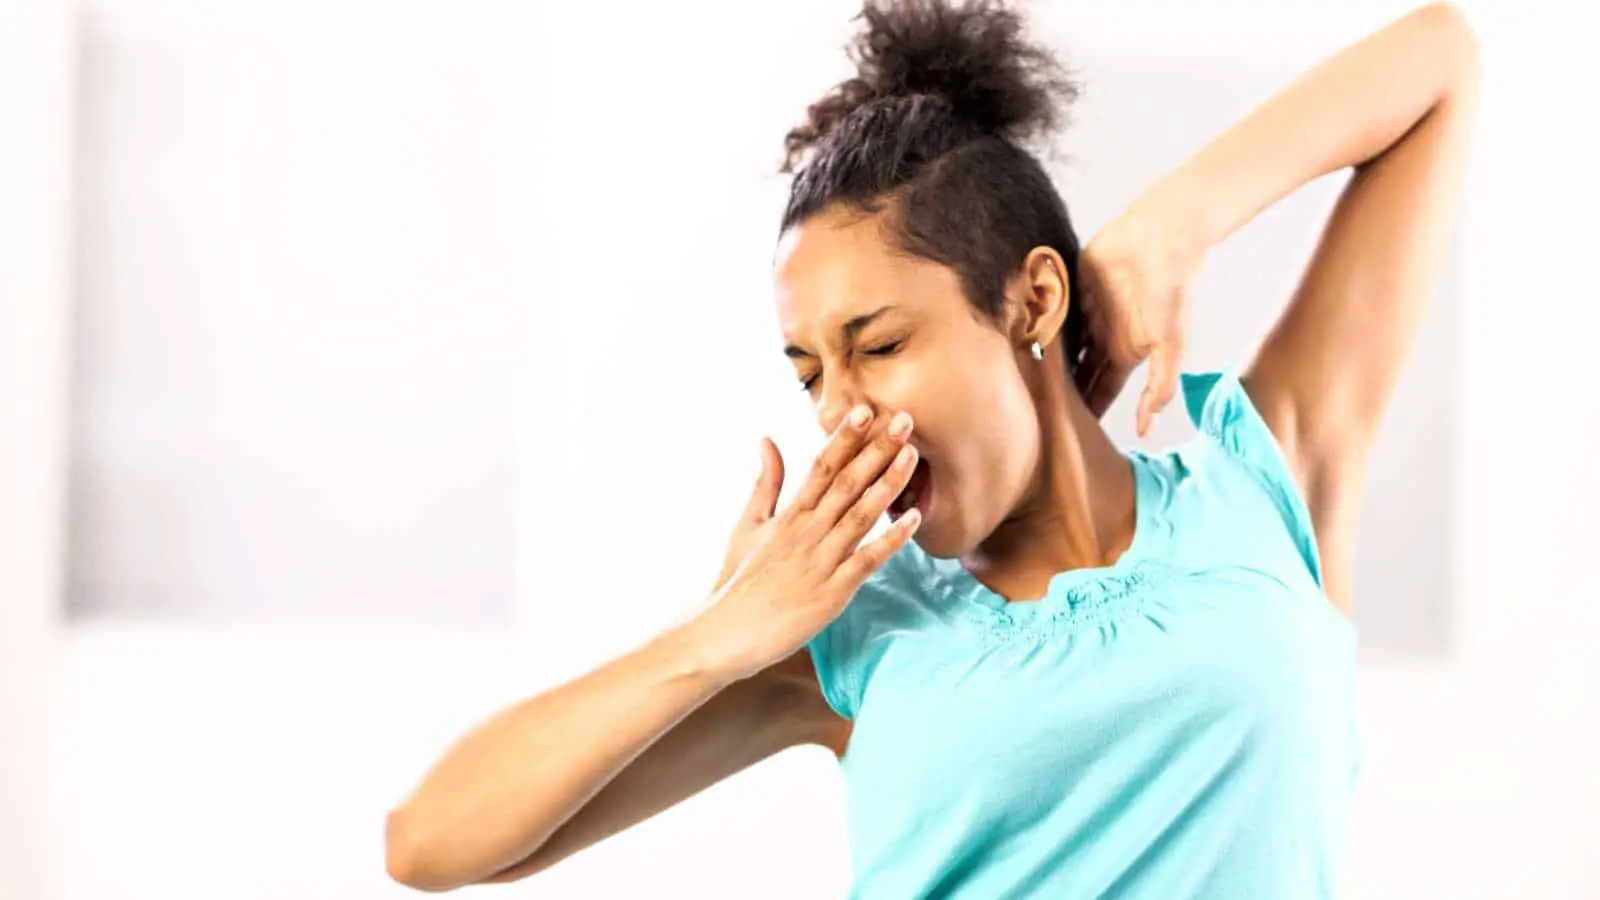 Why Does Doing Yoga Make You Yawn?